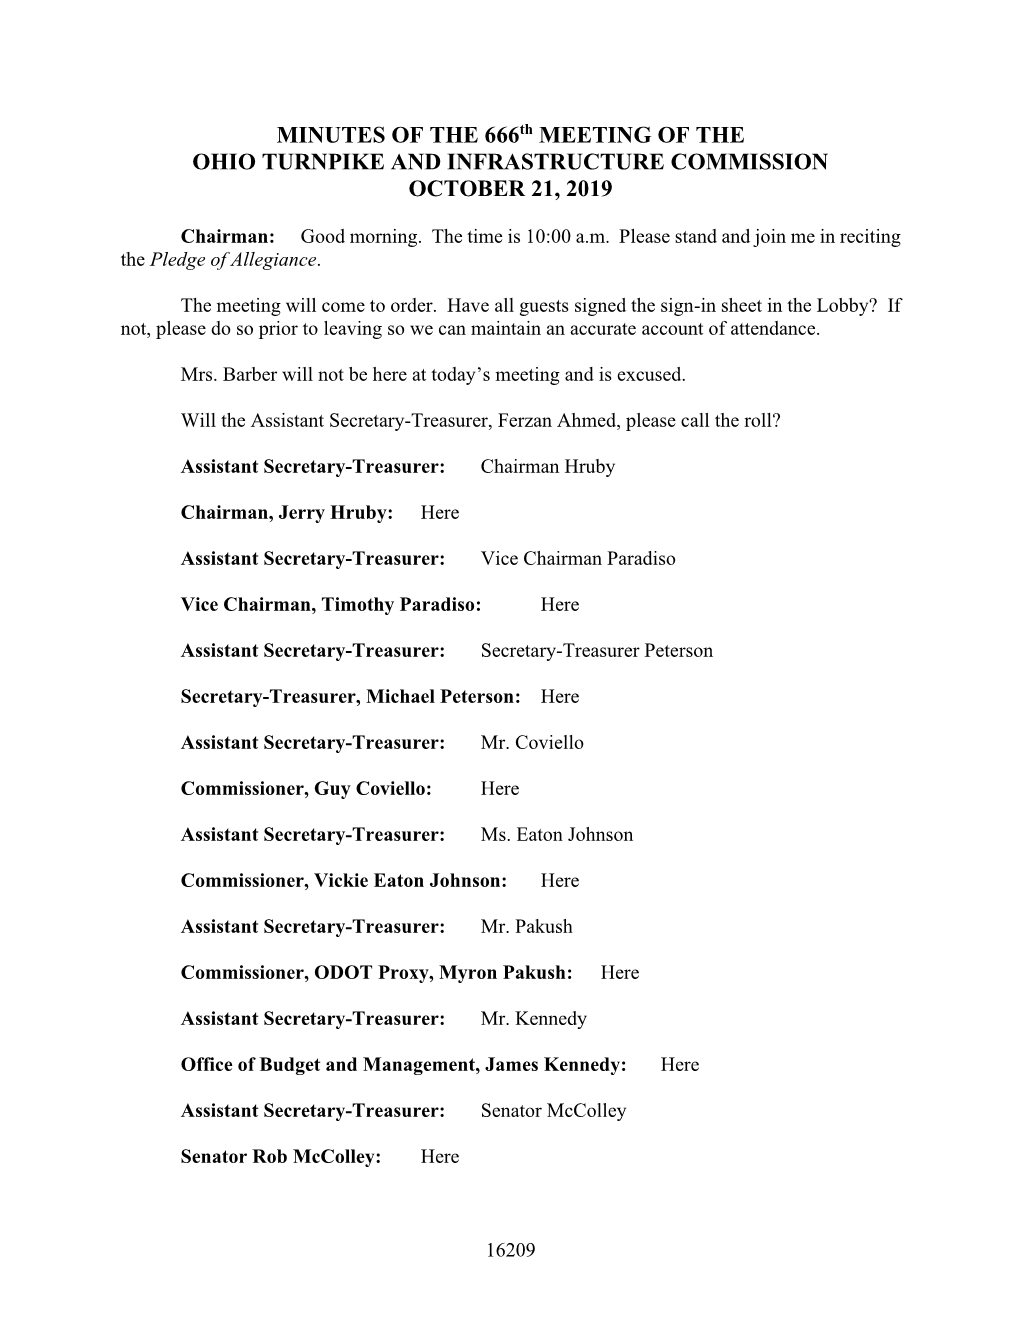 MINUTES of the 666Th MEETING of the OHIO TURNPIKE and INFRASTRUCTURE COMMISSION OCTOBER 21, 2019